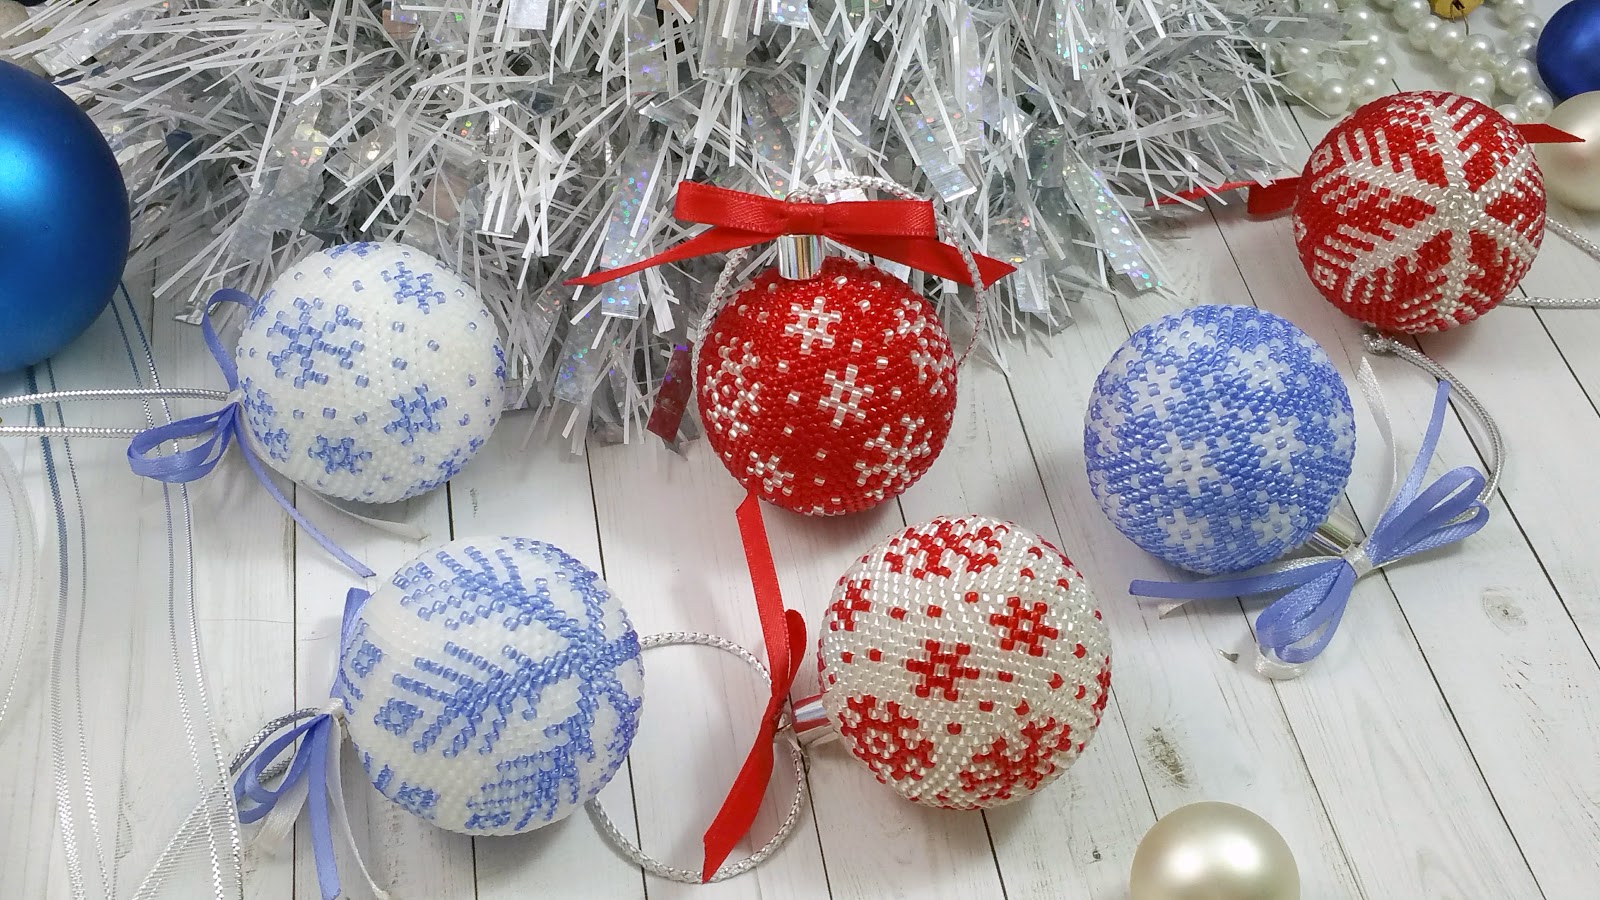 Blue and white X-mas ornaments